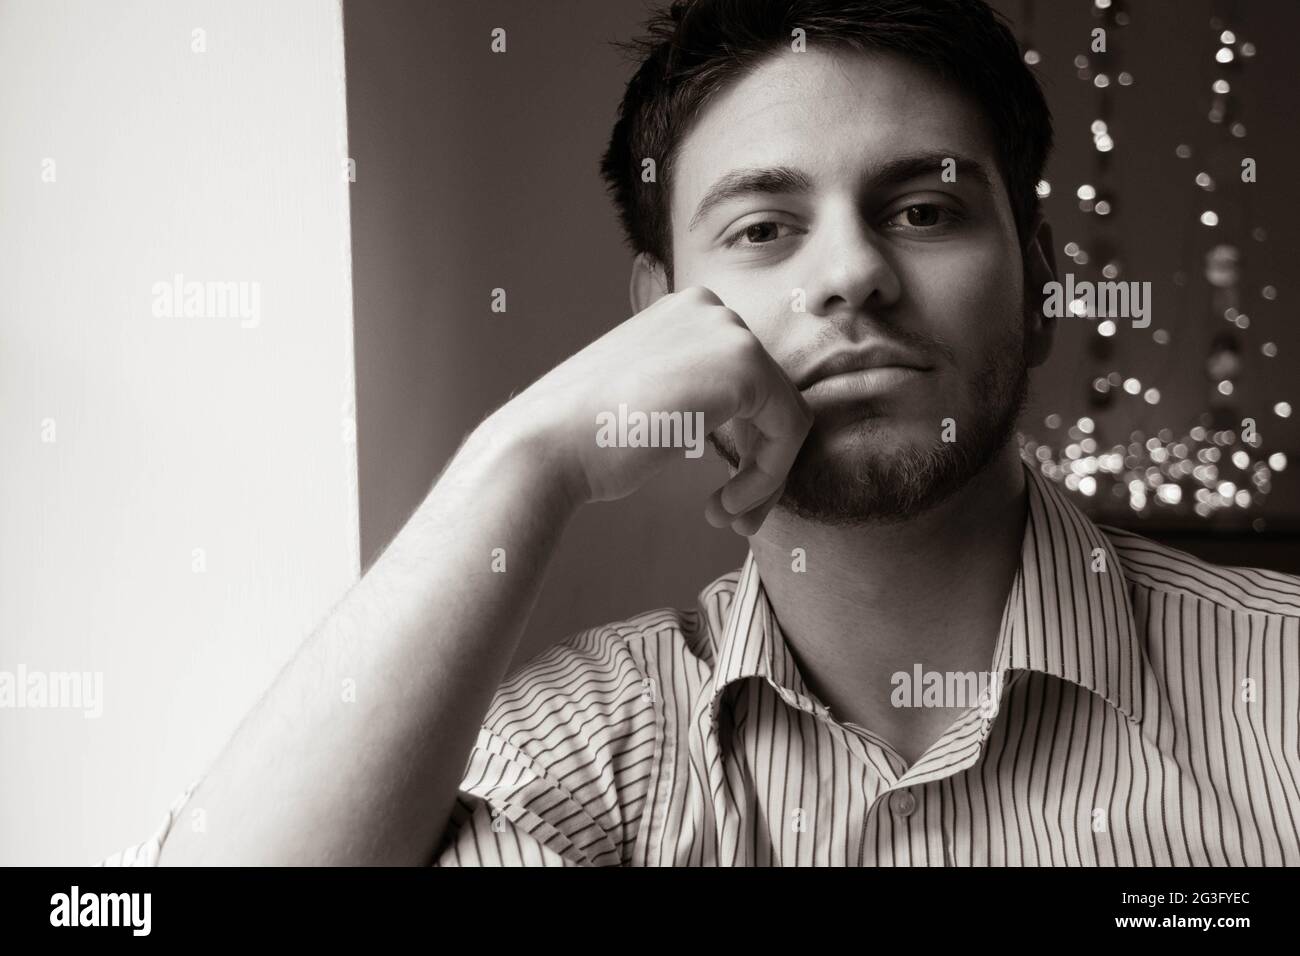 Portrait of attractive man with beard sitting next to window with lights in the background Stock Photo